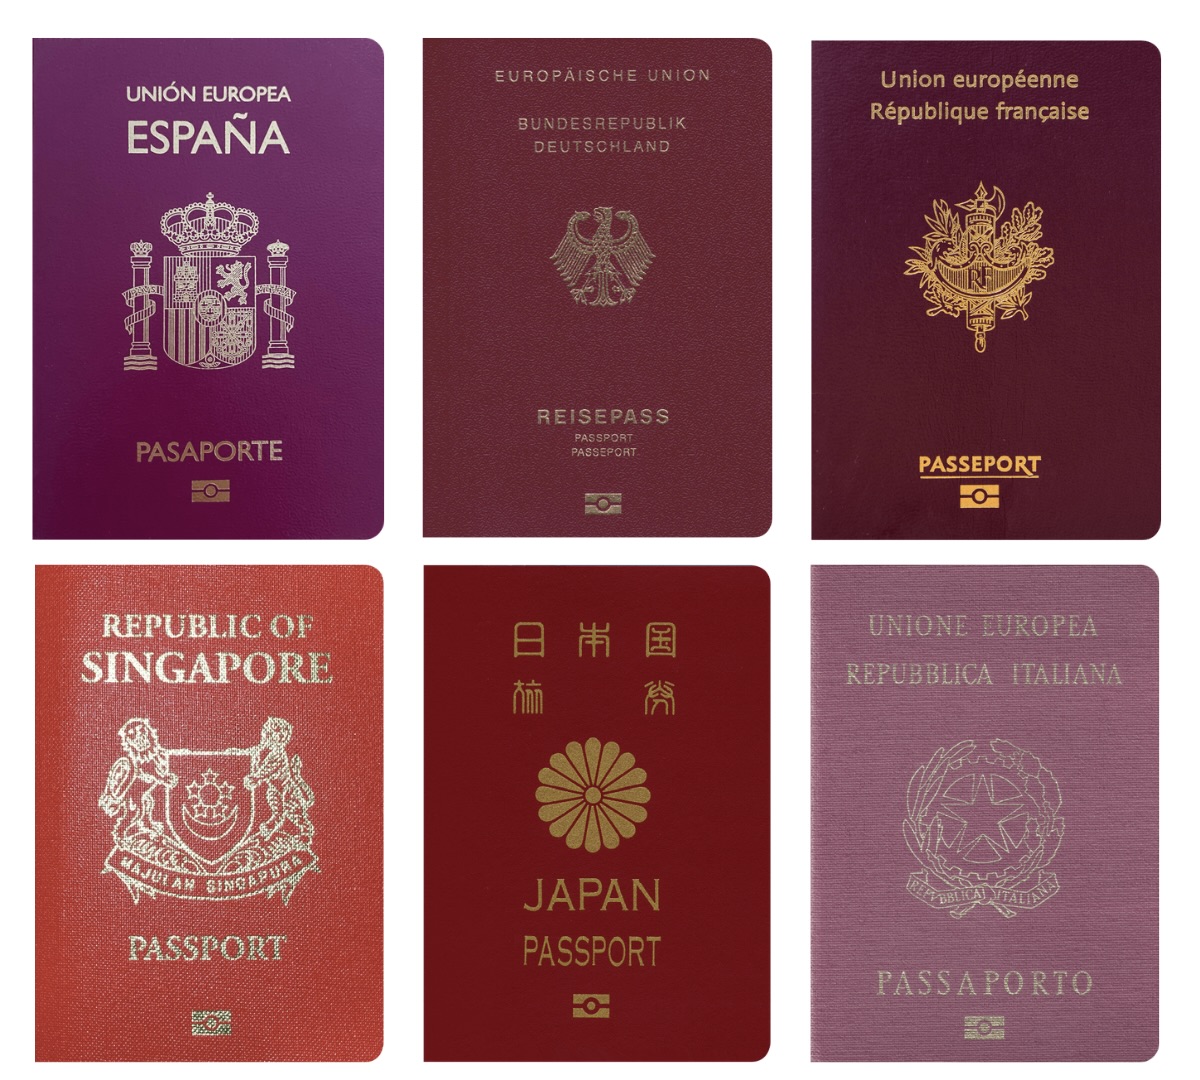 The passports of Spain, Germany, France, Singapore, Japan, and Italy